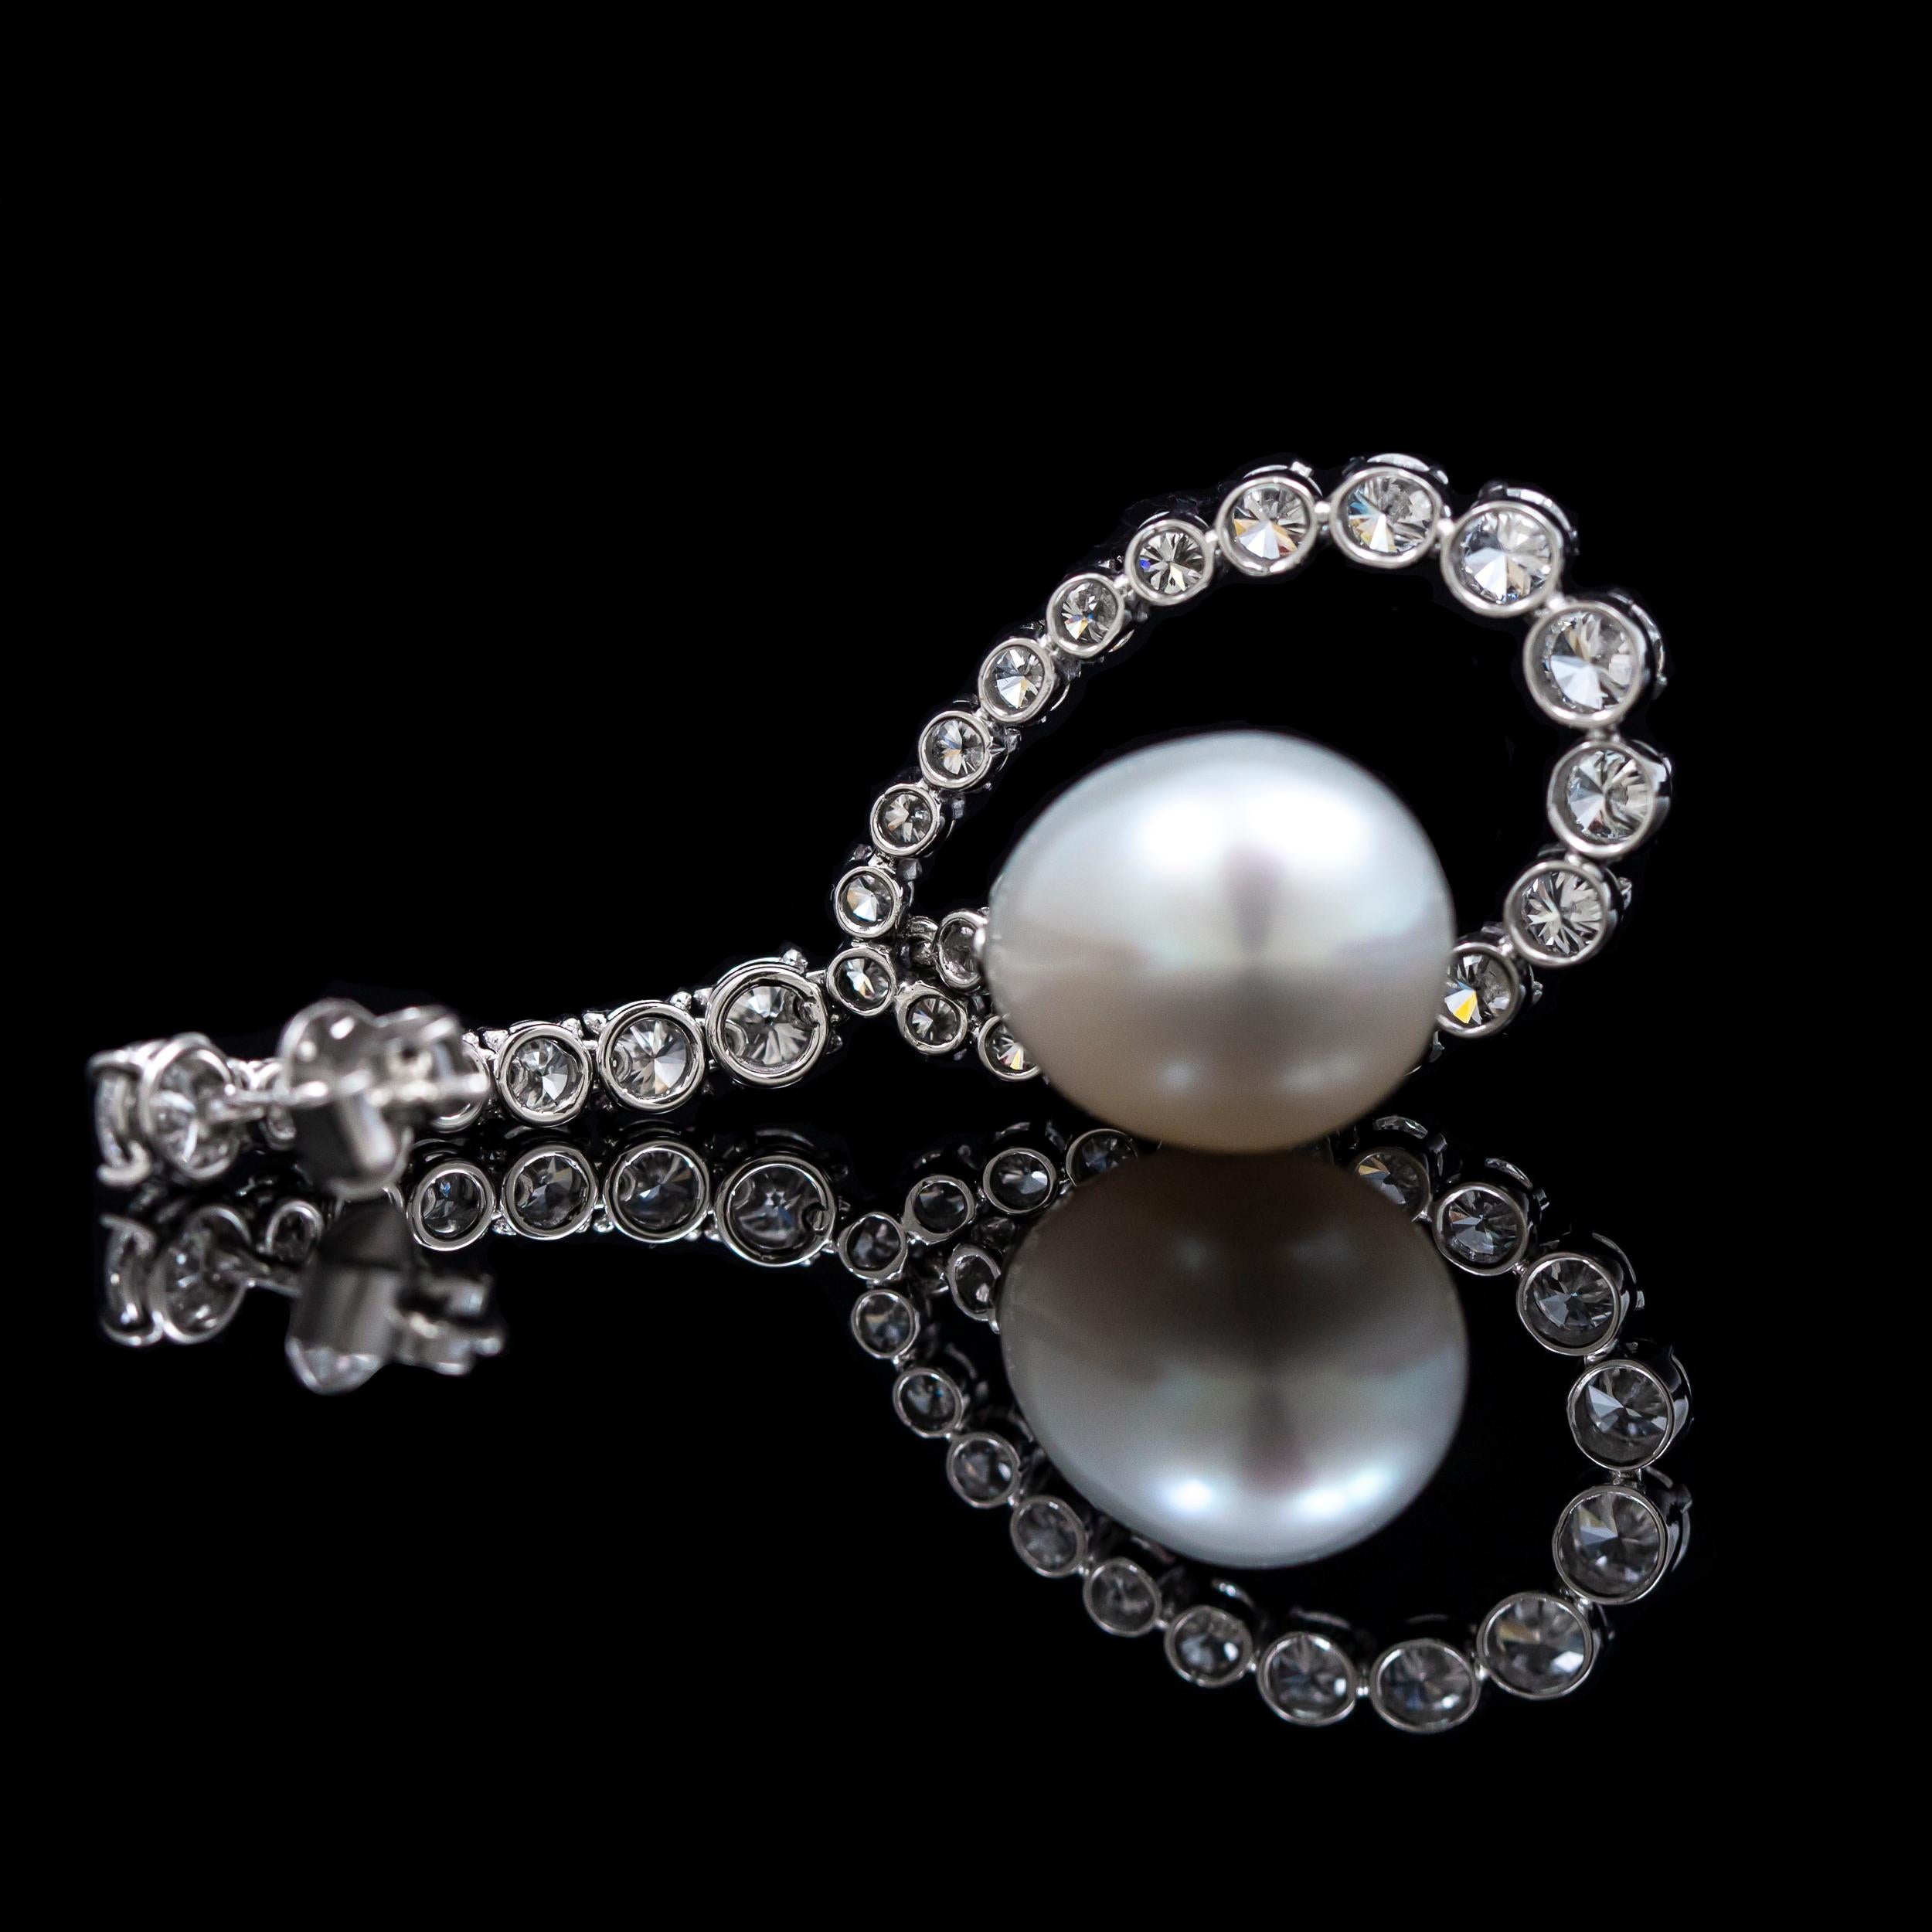 Vintage 6 Carat Diamond Cultured Pearl Drop Earrings White Gold 20th Century For Sale 4